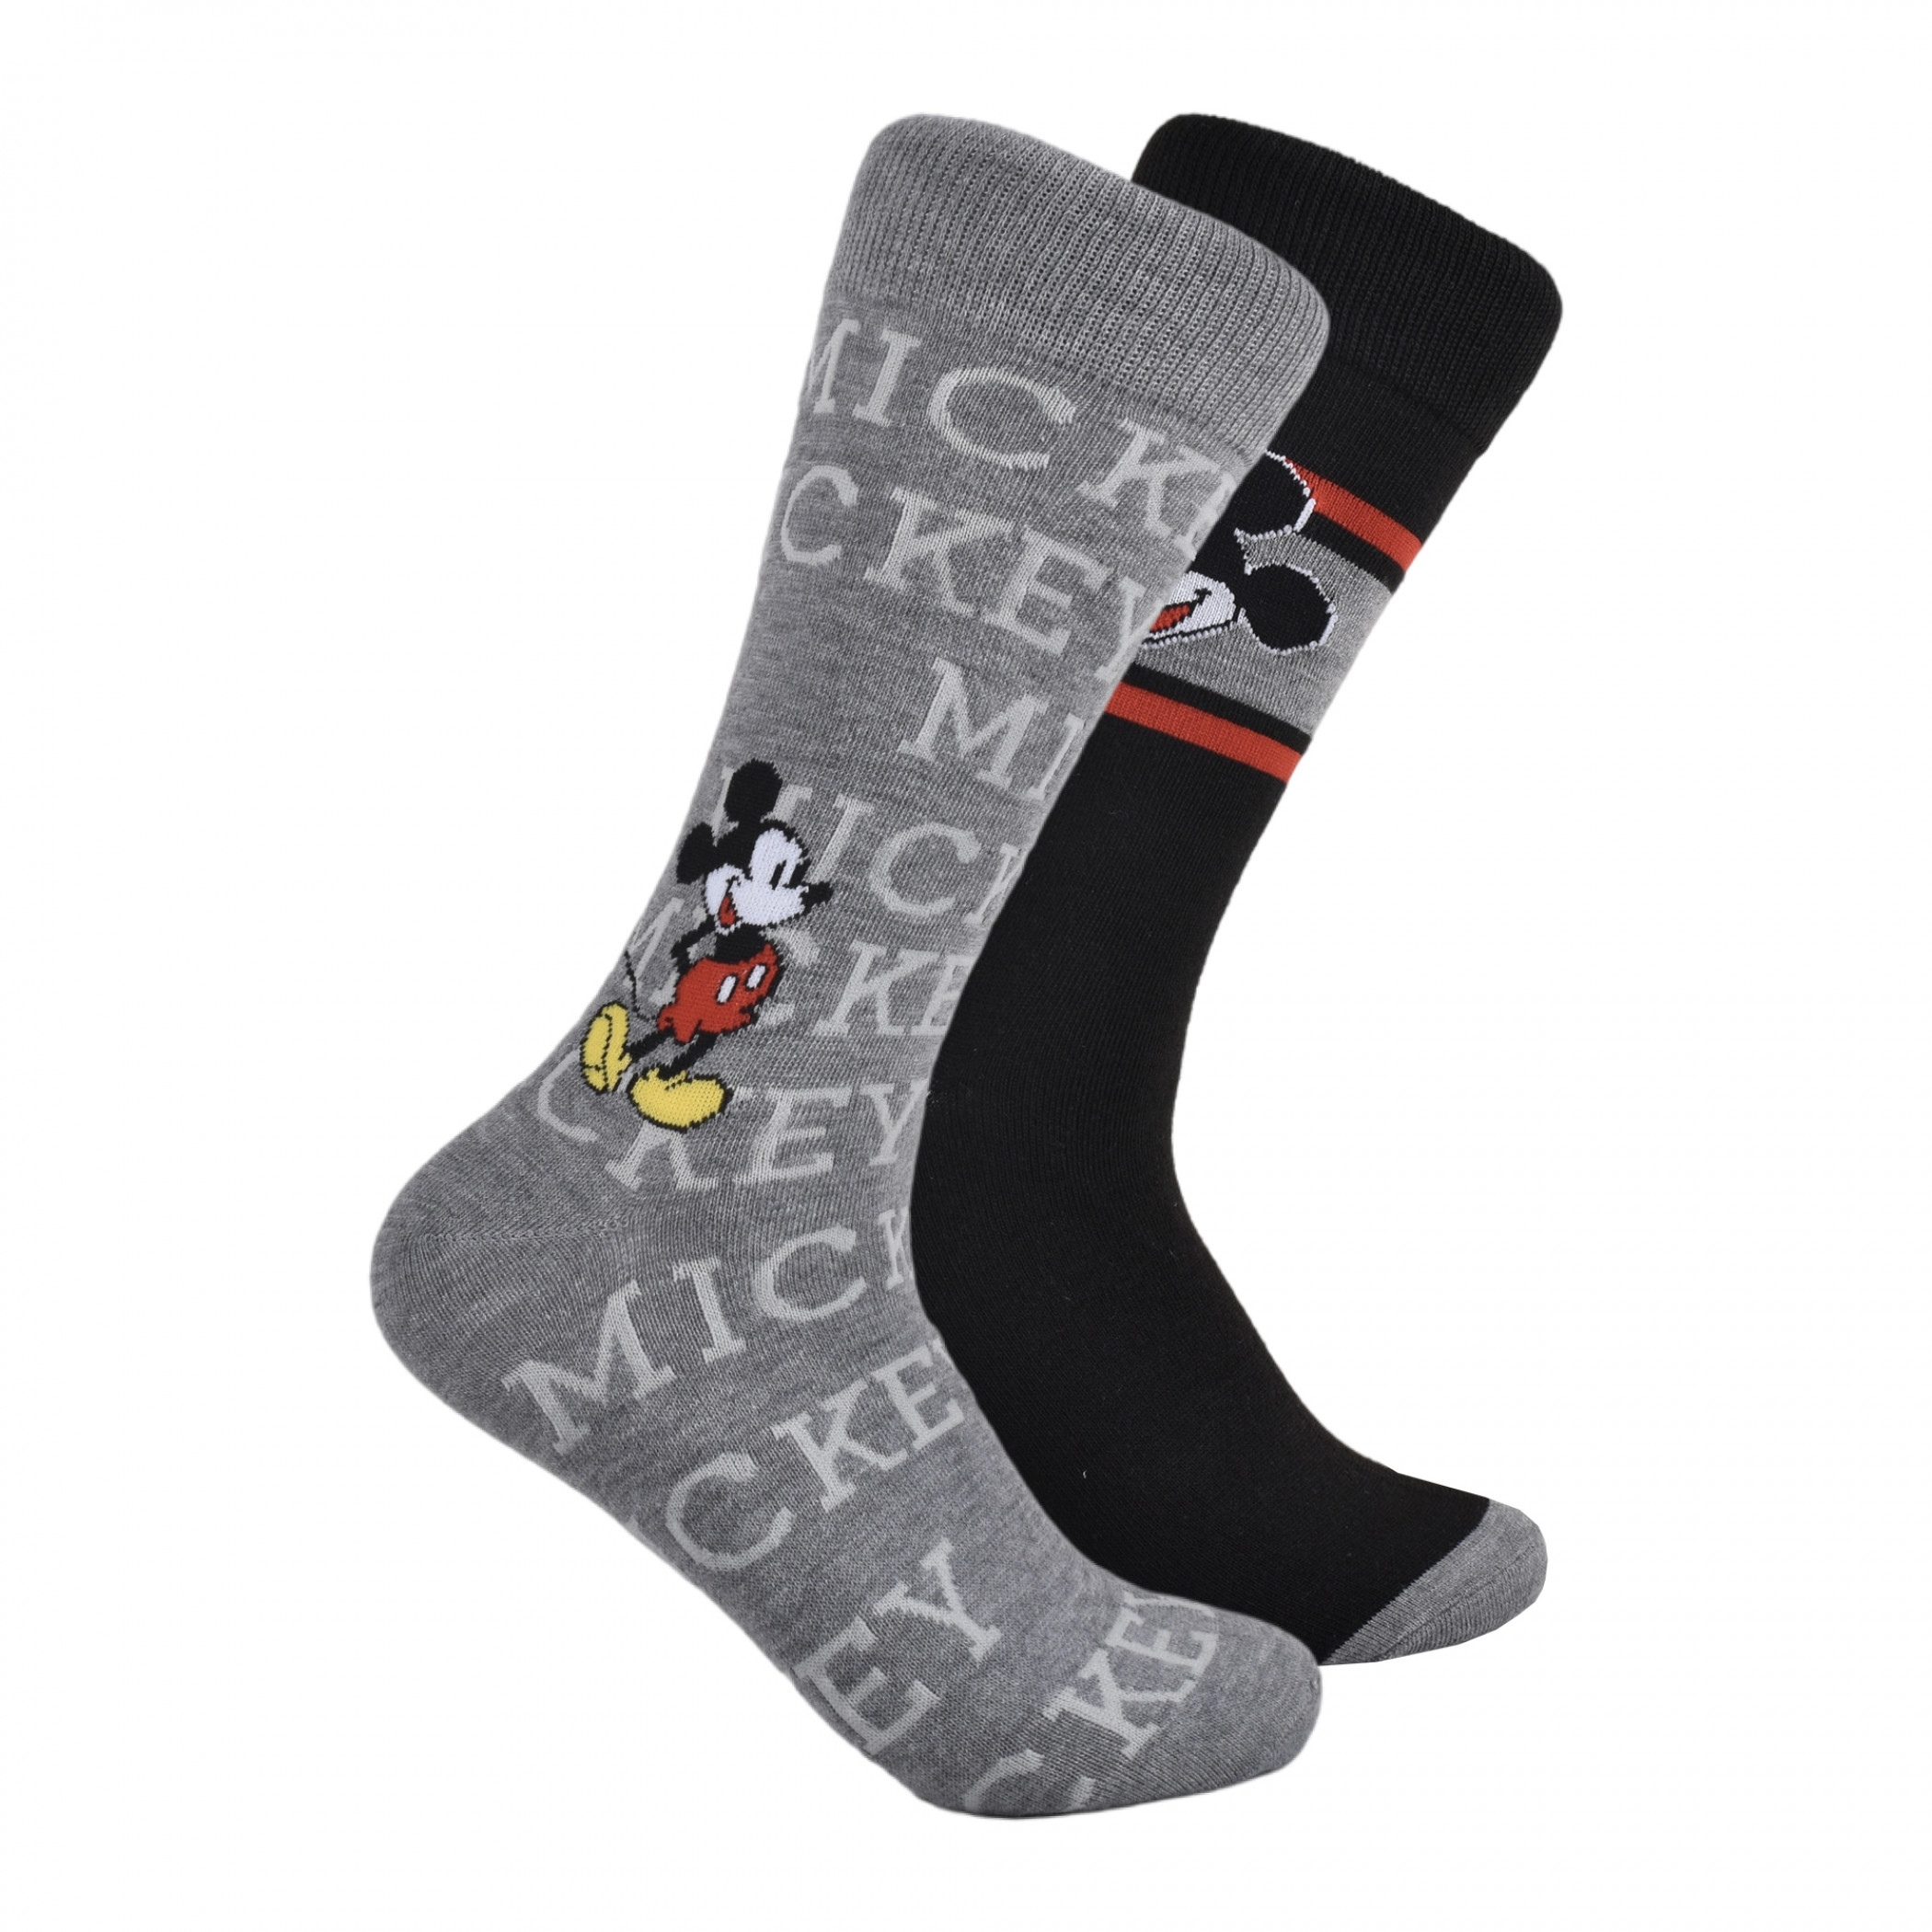 Disney Mickey Mouse Mismatched Crew Socks 2-Pair Pack